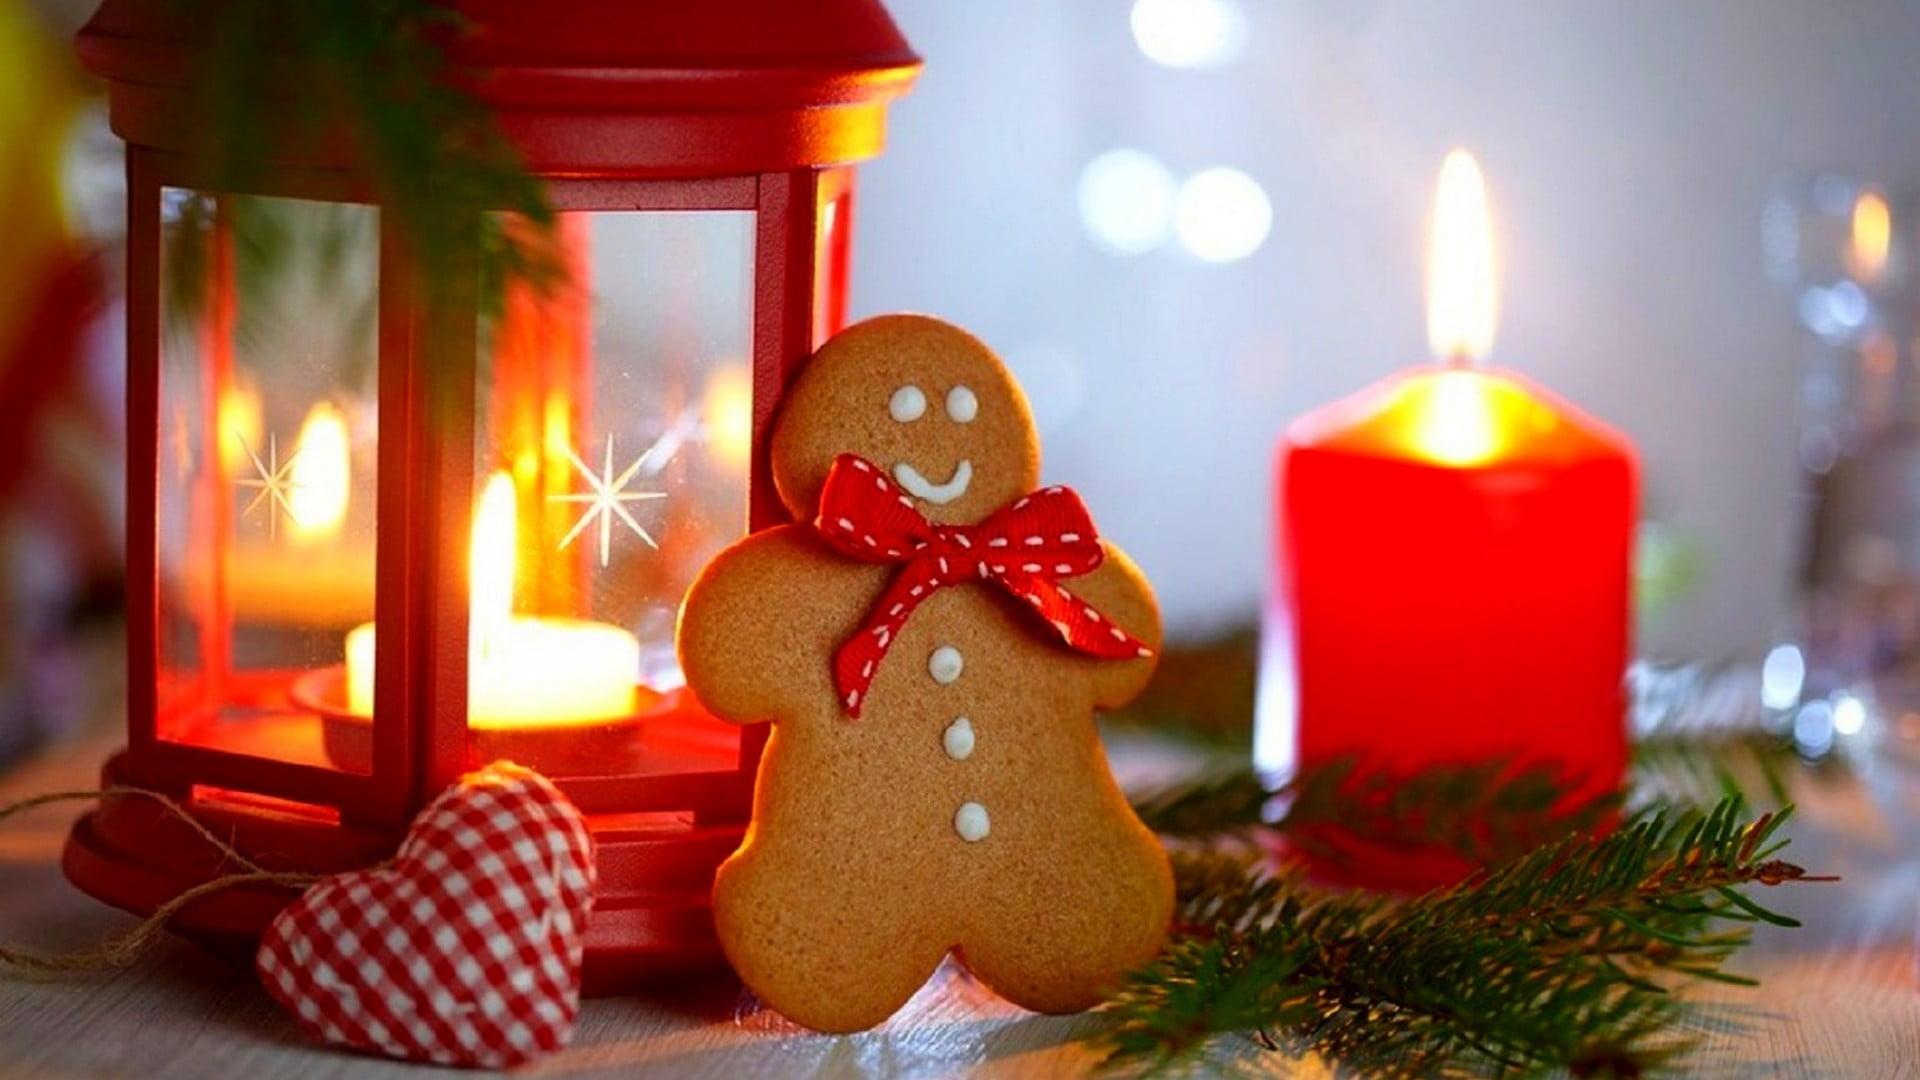 Gingerbread man cookie, New Year, Christmas, gingerbread